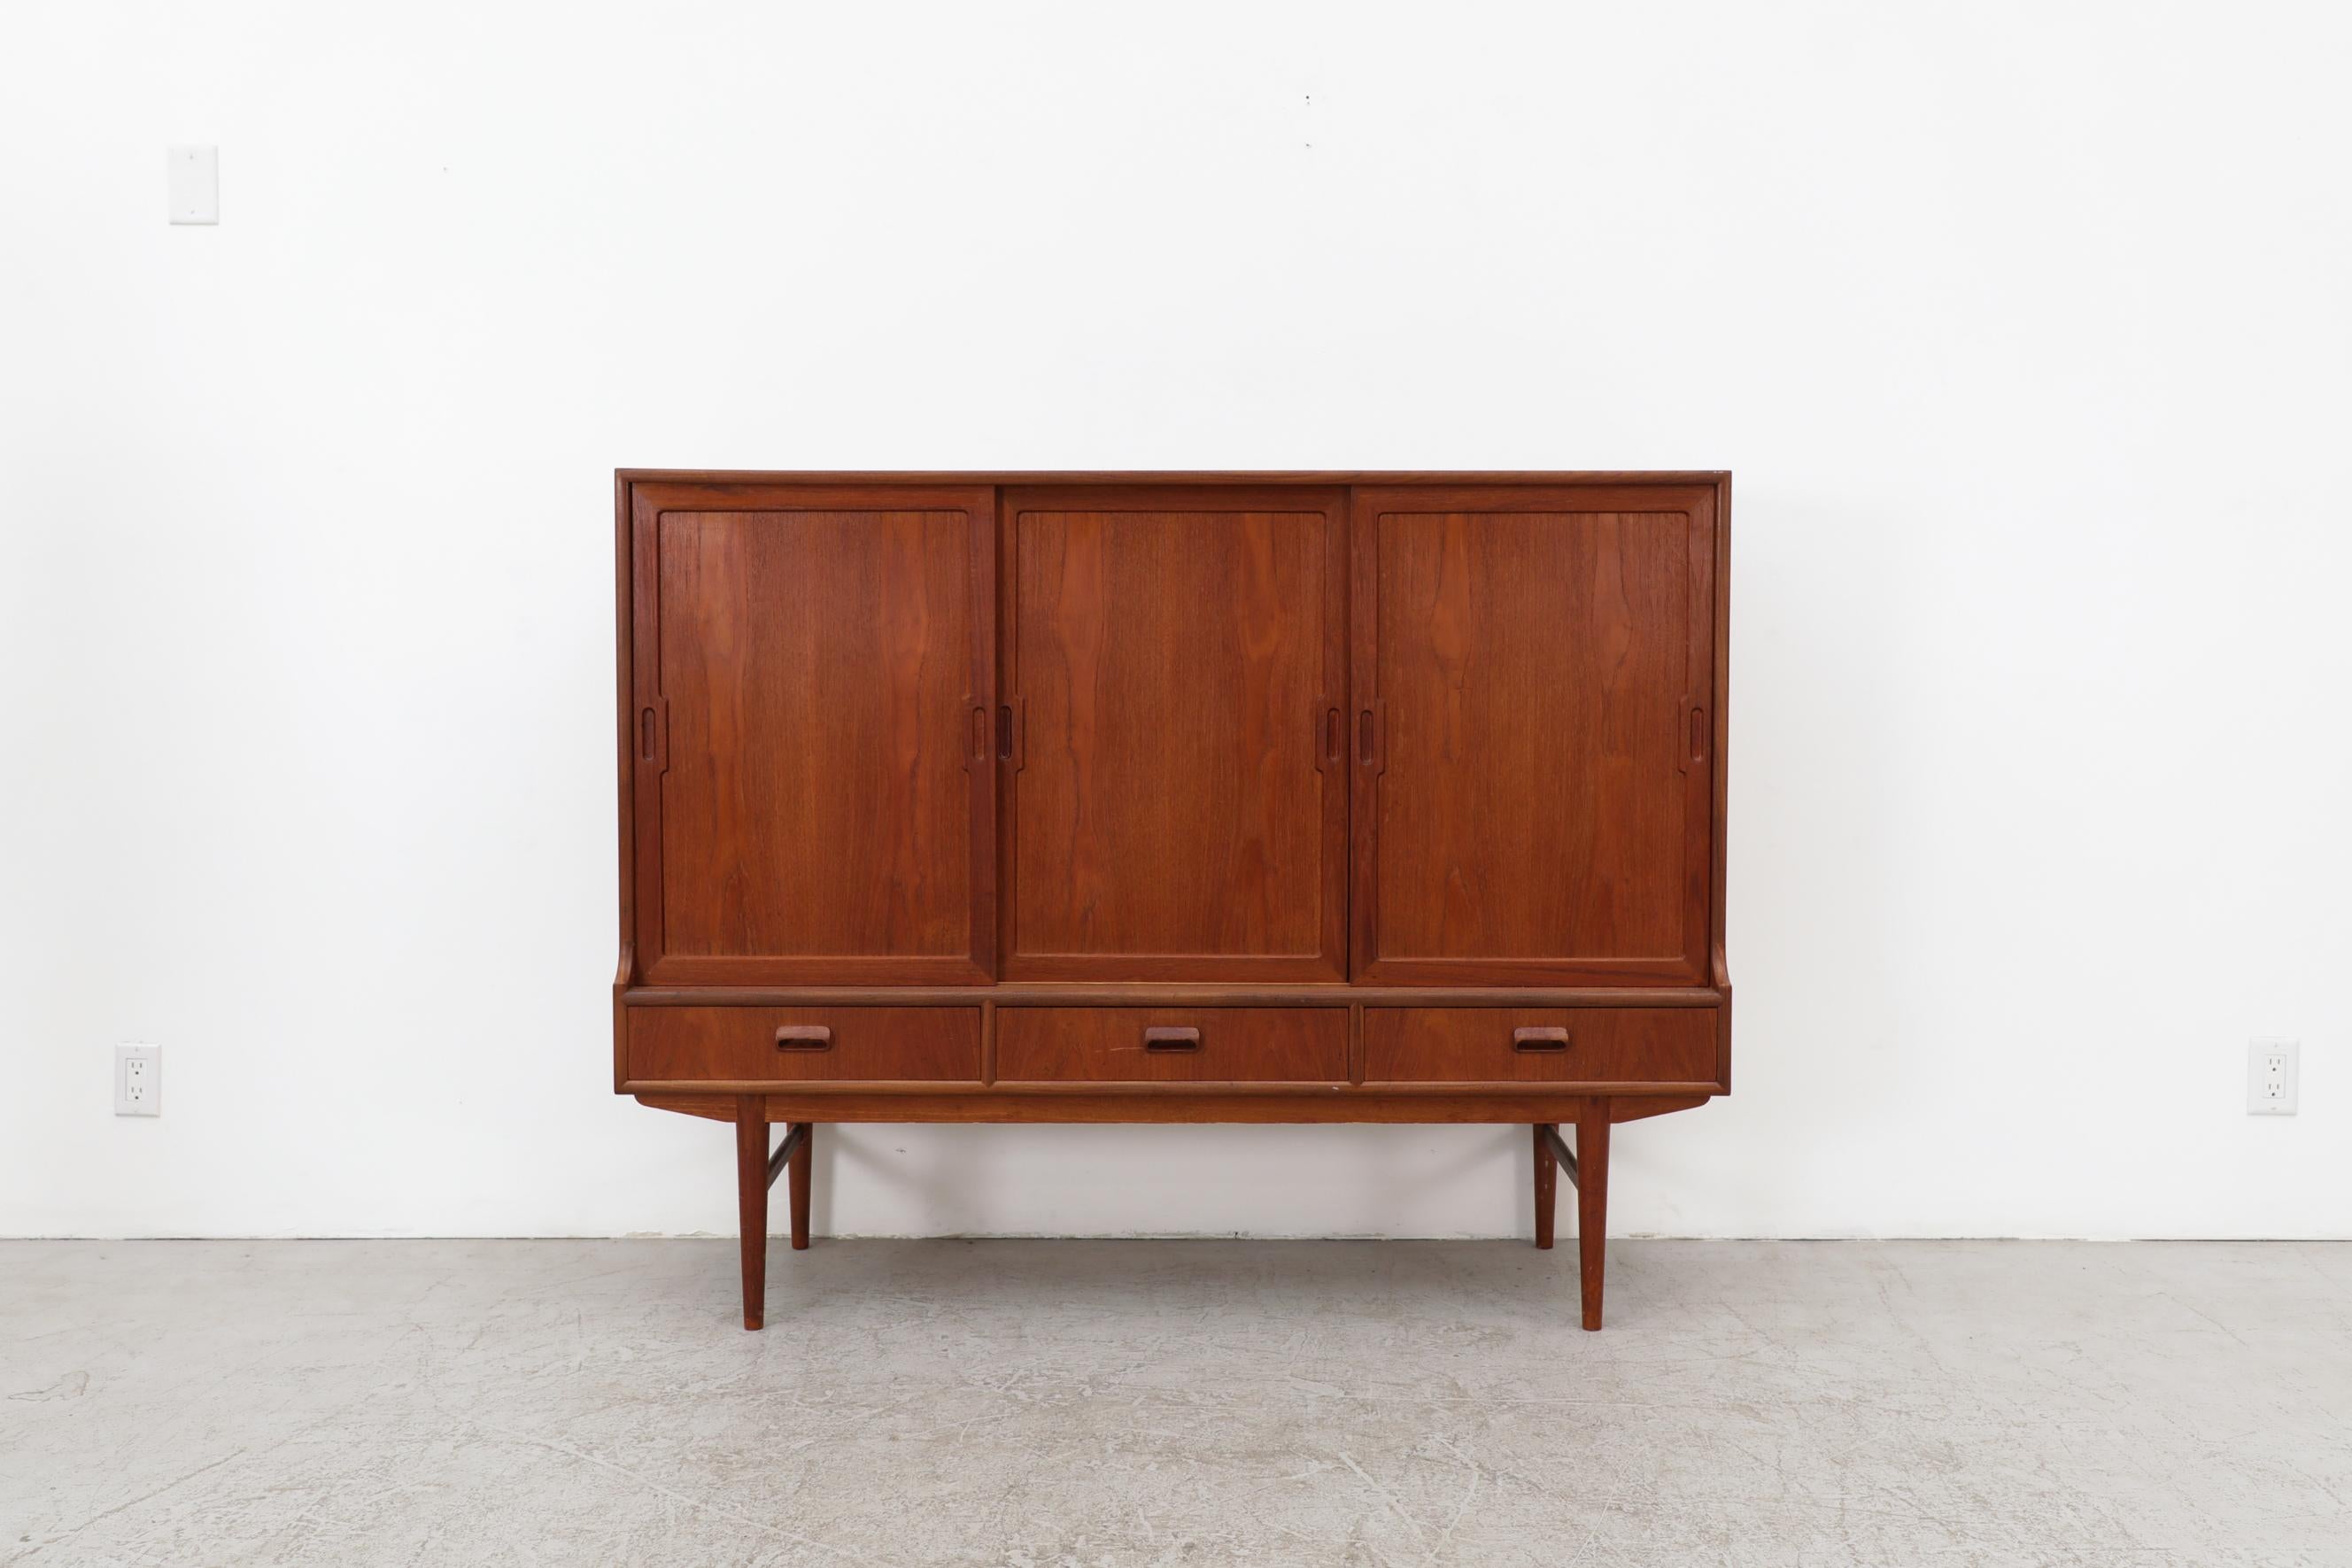 Danish Modern teak highboard with three sliding doors, inset carved oval pulls and plenty of storage space. Carved teak lower drawer handles, blonde interior wood, felt lined flatware drawers above with tapered legs. A lovely example of Danish